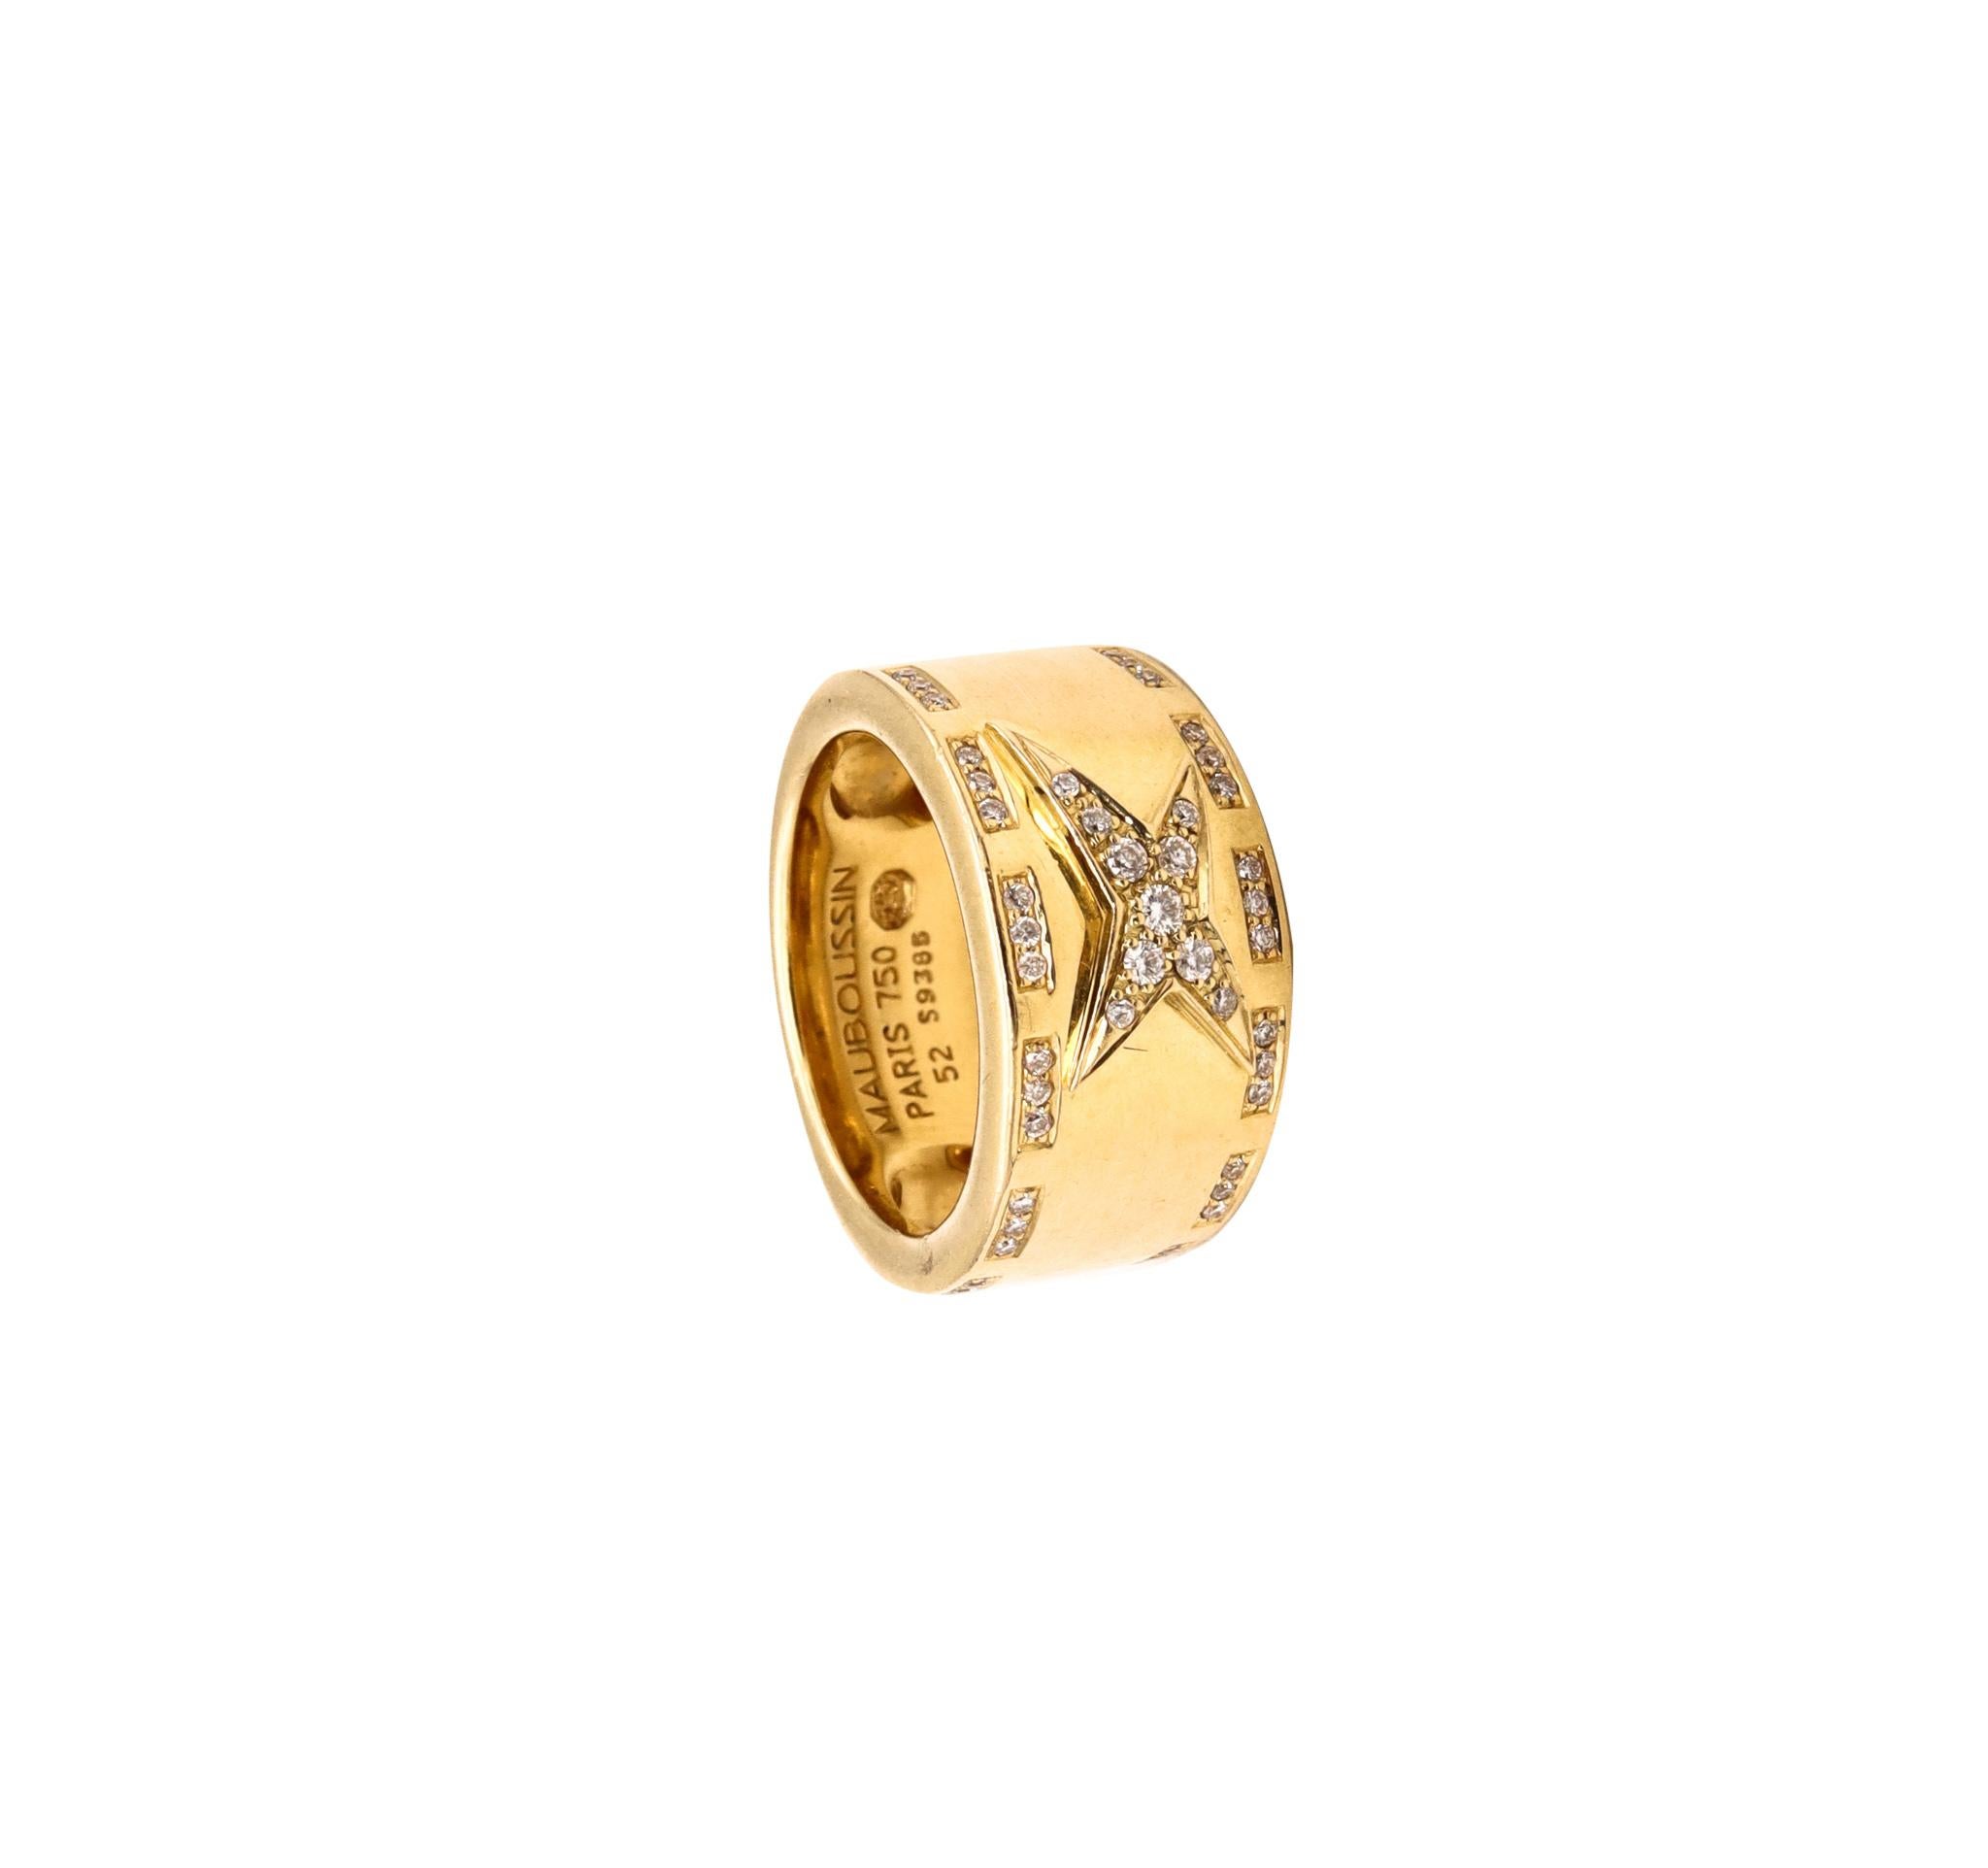 An Etoile Divide jeweled ring designed by Mauboussin.

This recognizable iconic piece, was created by the famous Parisian jewelry house of Mauboussin in solid yellow gold of 18 karats, with high polished finish.

Embellished on top, with a